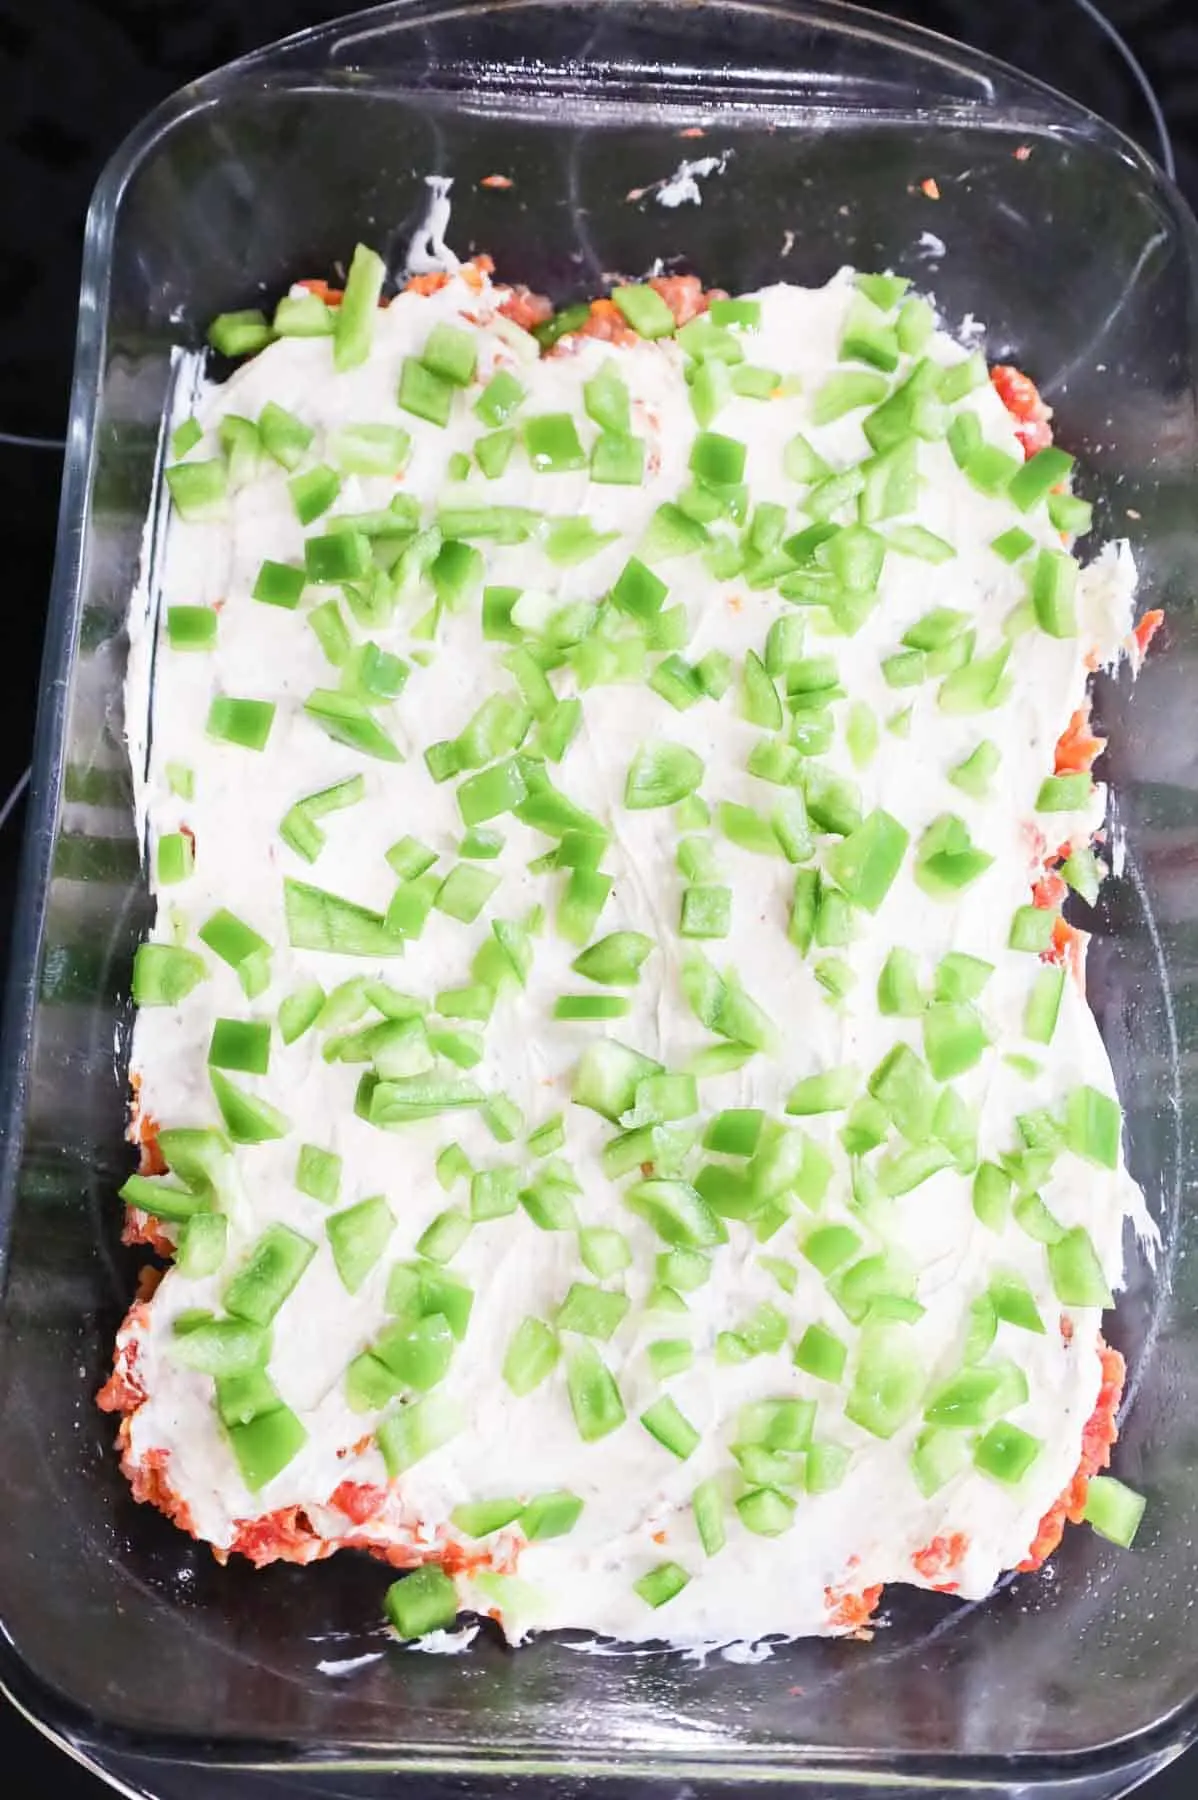 diced green bell peppers on top of cream cheese and meatloaf mixture in a baking dish